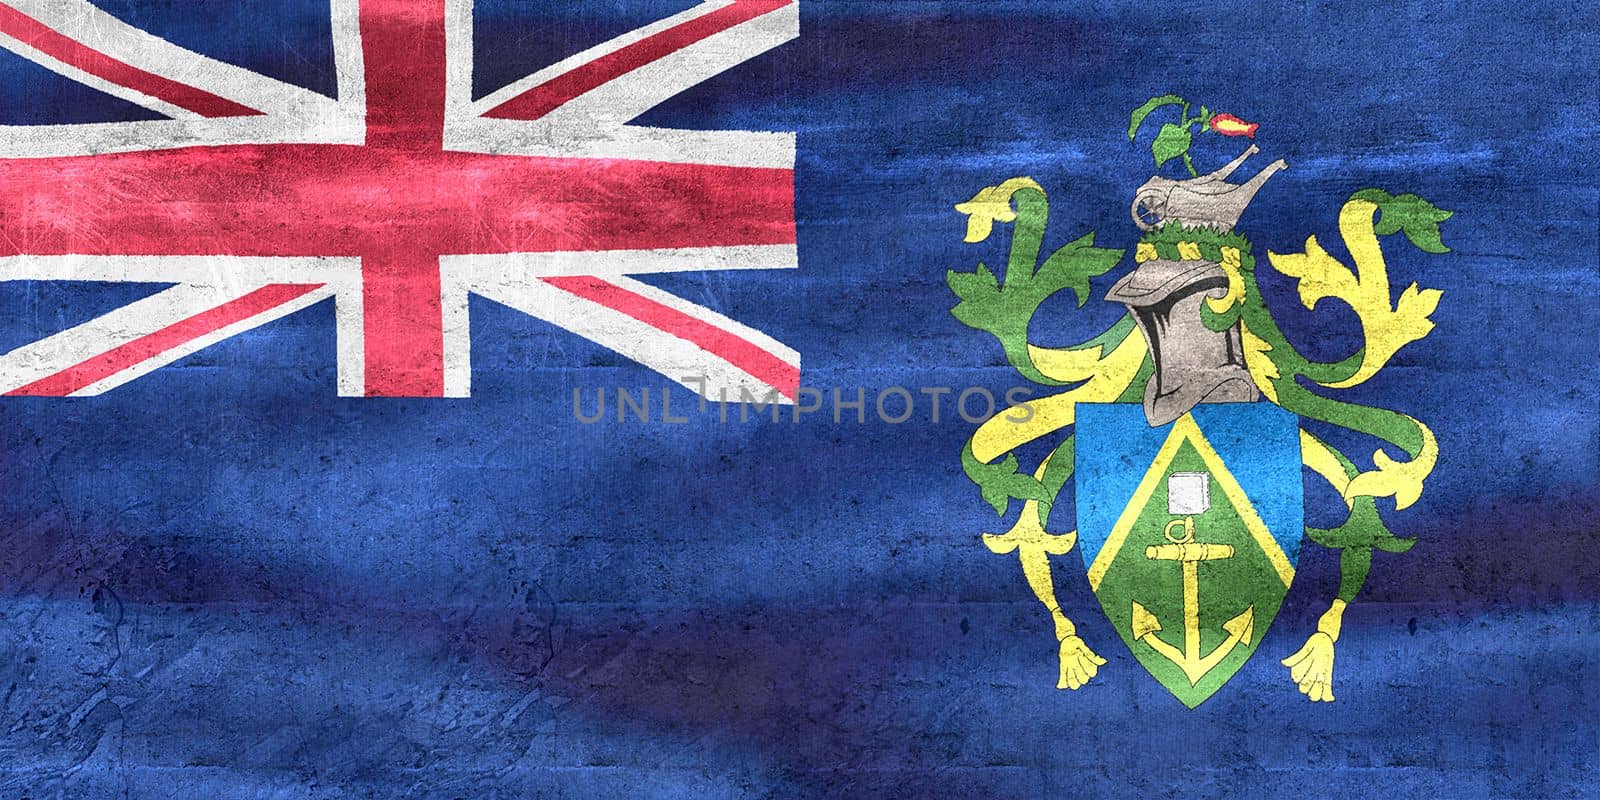 3D-Illustration of a Pitcairn Islands flag - realistic waving fabric flag by MP_foto71